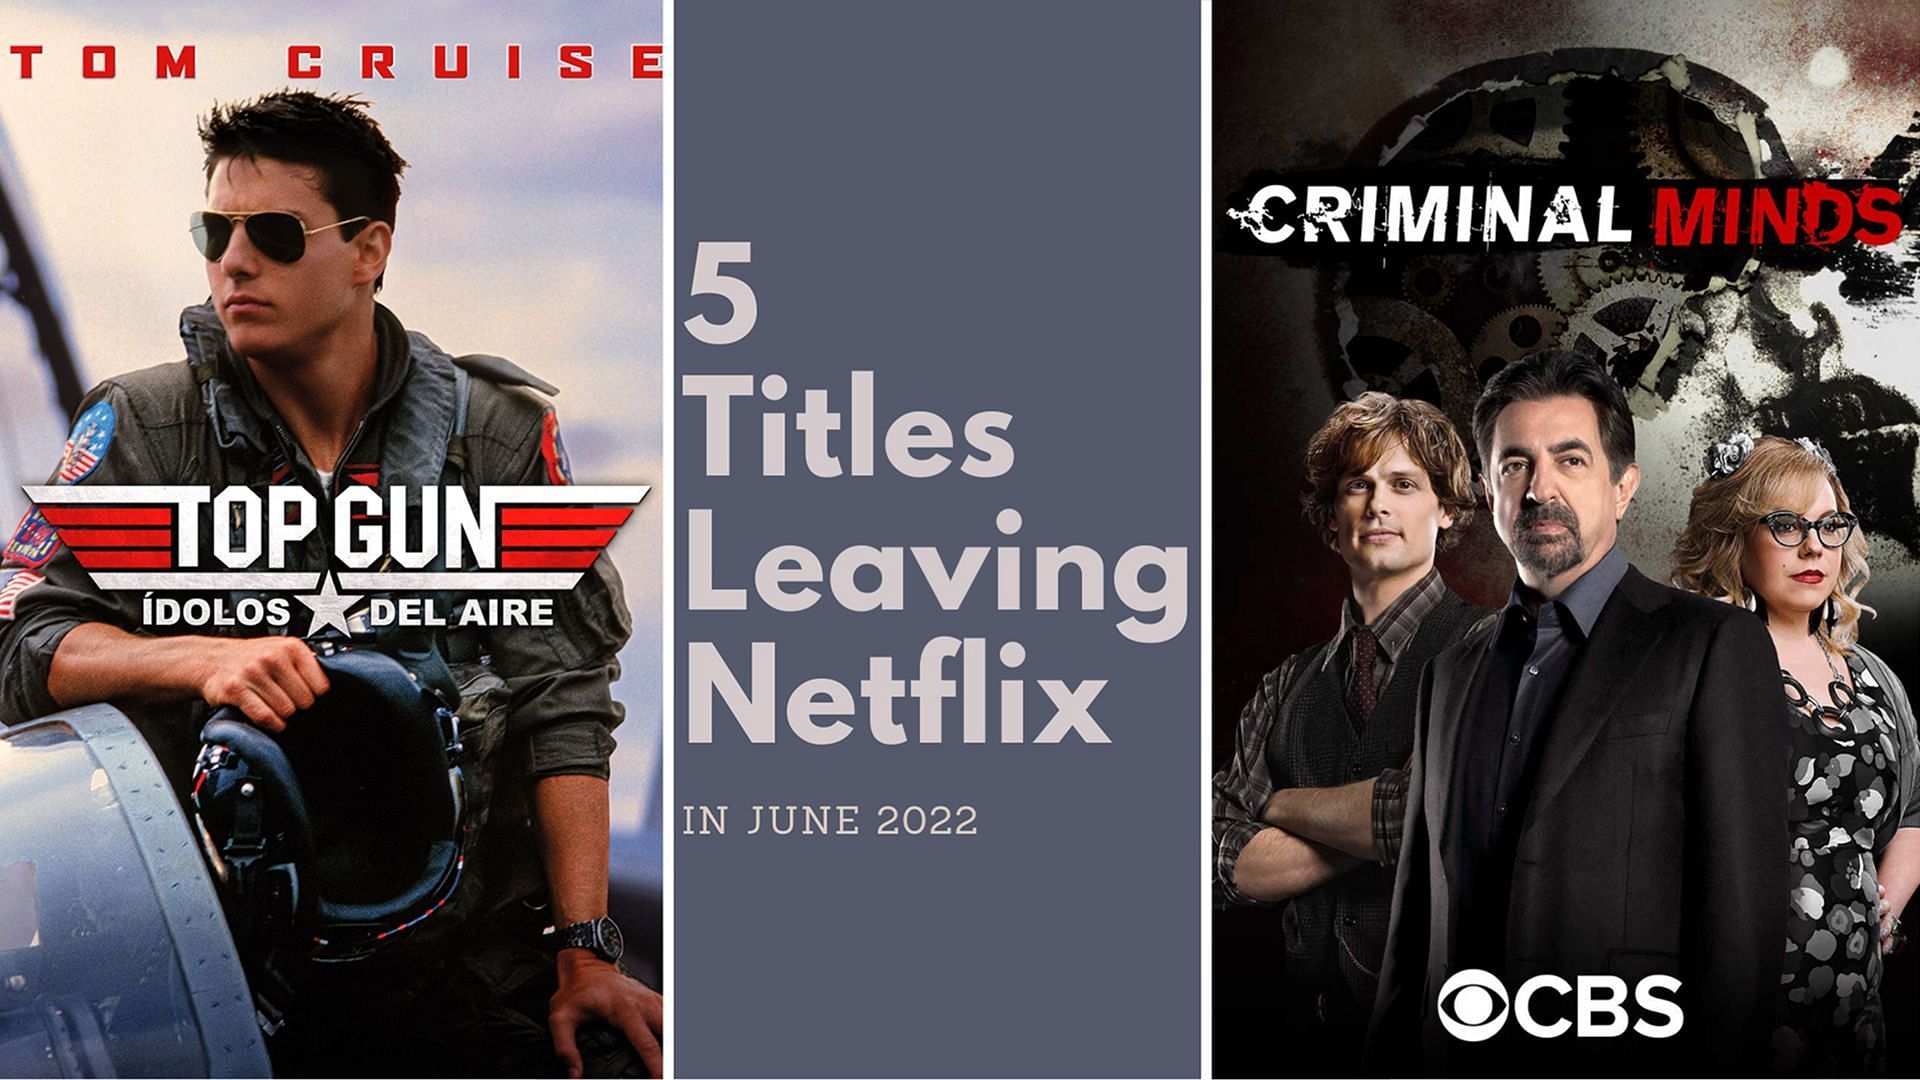 5 Titles leaving Netflix in June 2022 (Images via Paramount Pictures/CBS)